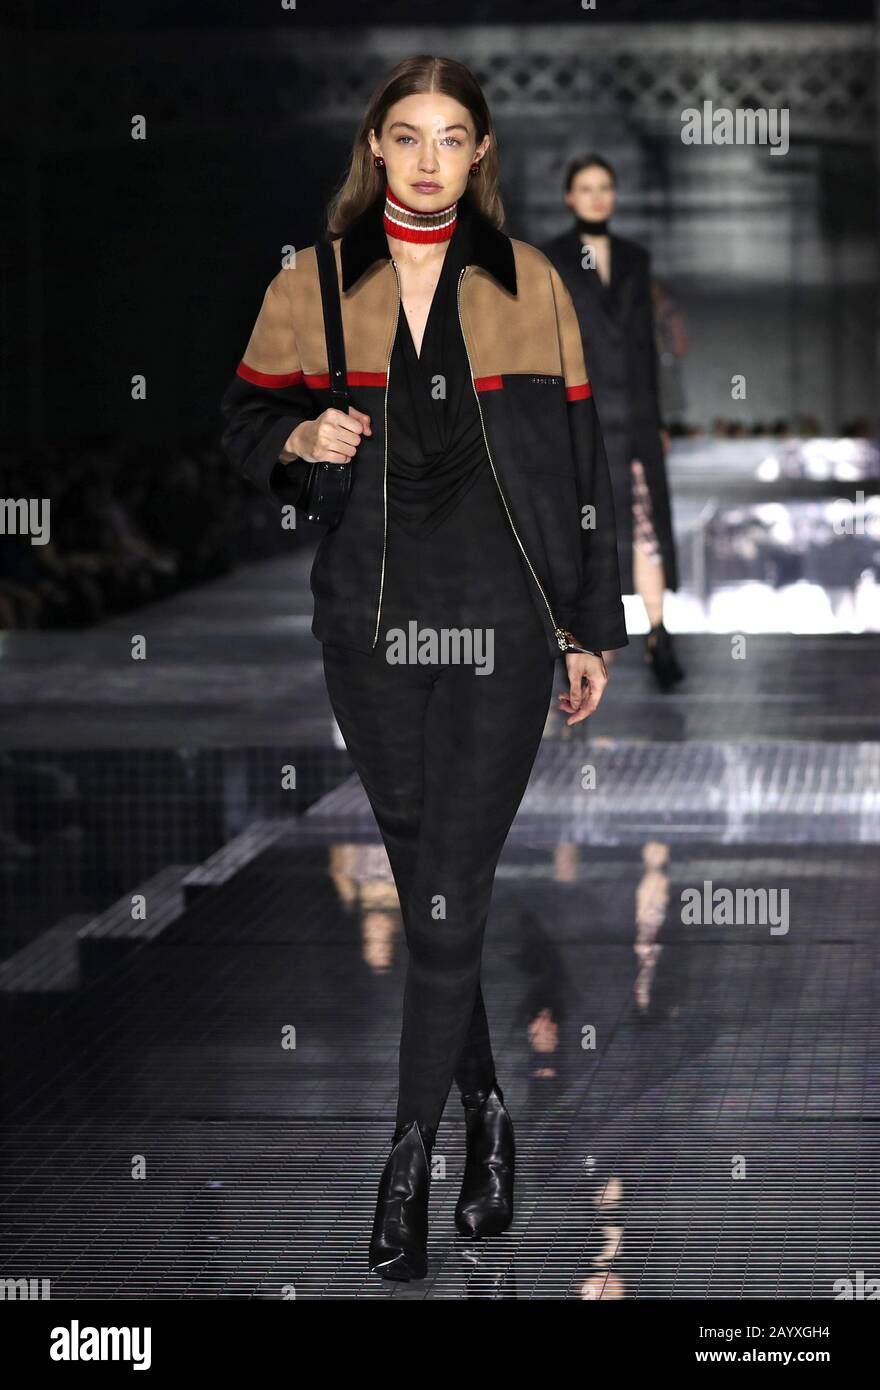 Gigi Hadid during the Burberry show at London Fashion Week February 2020,  held at Olympia National, London Stock Photo - Alamy